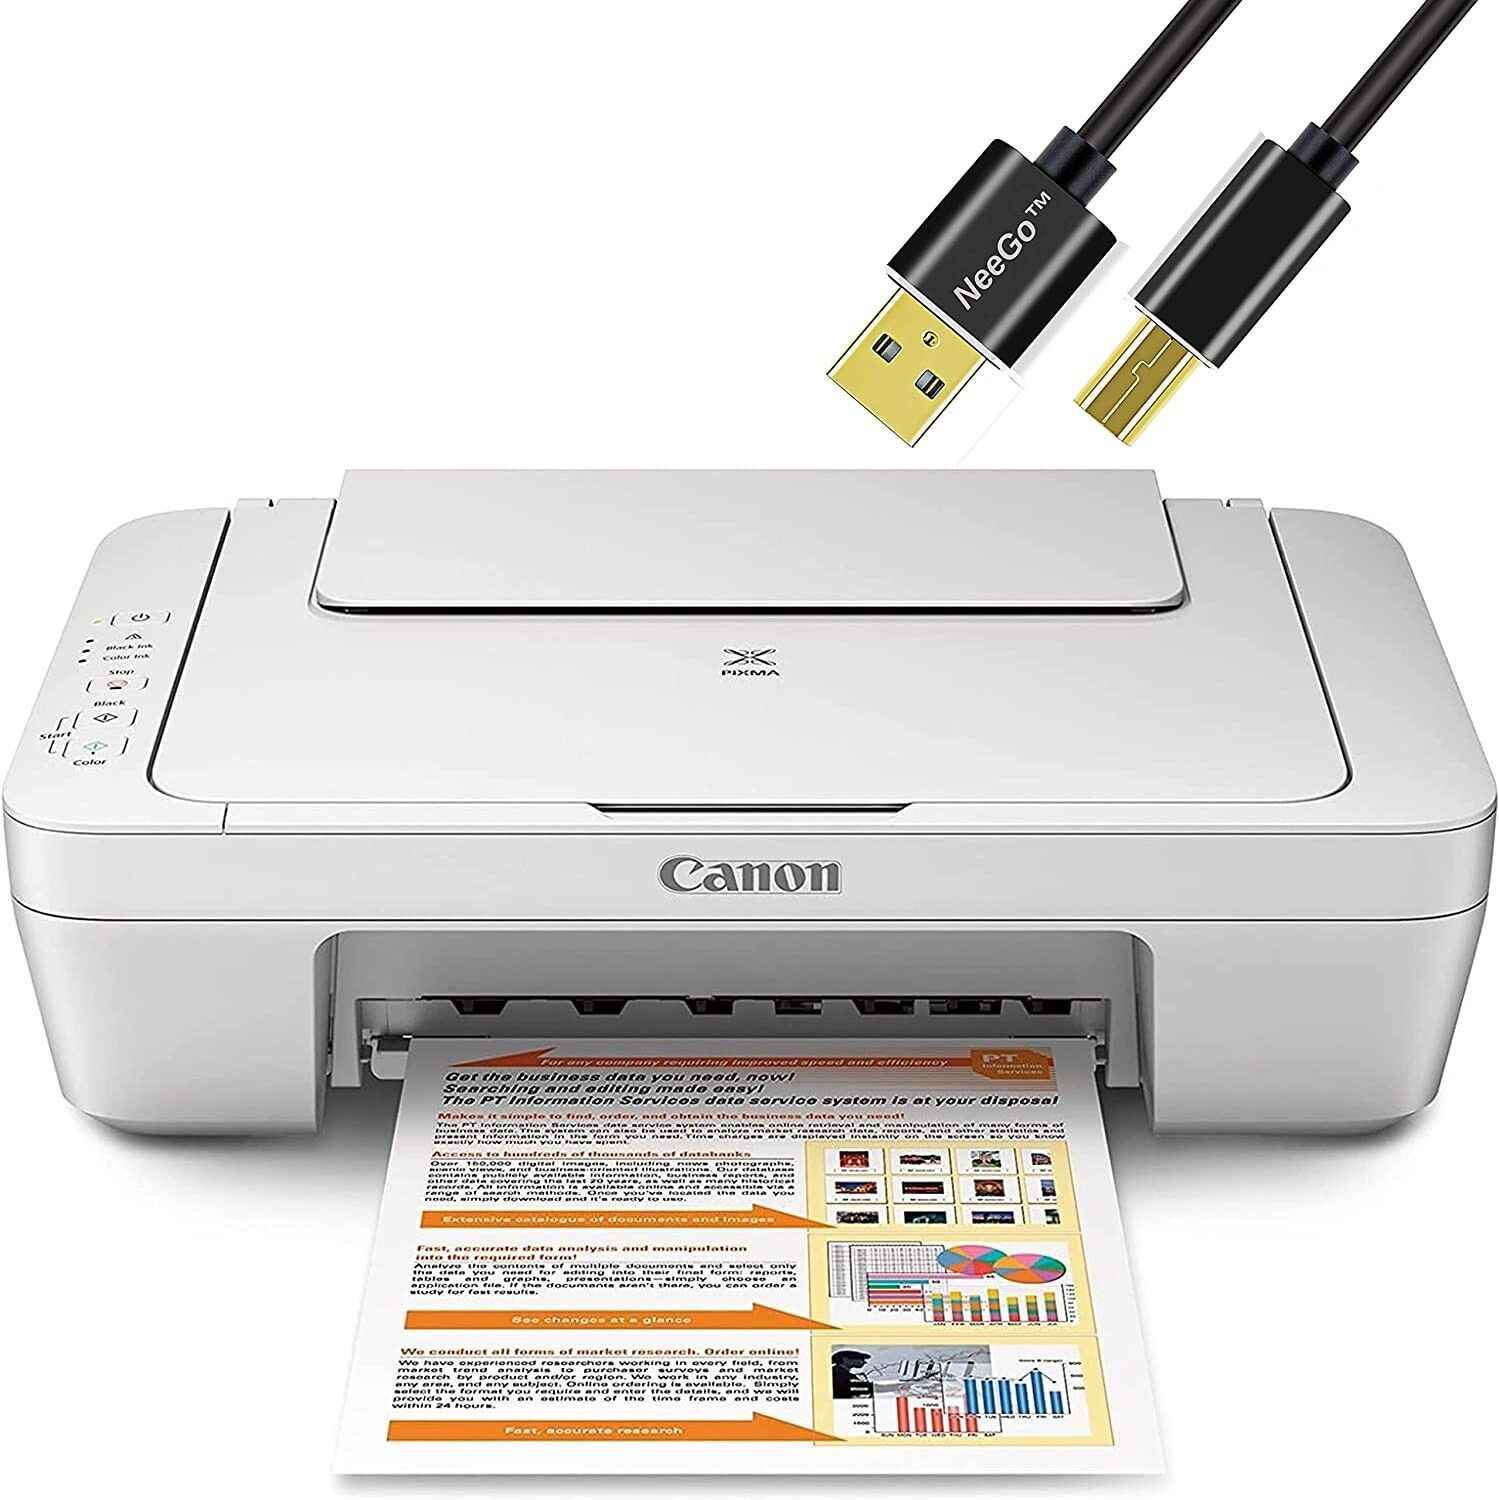 Canon Pixma Inkjet All-In-One Printer - MG2522. Scan, Copy, Fax